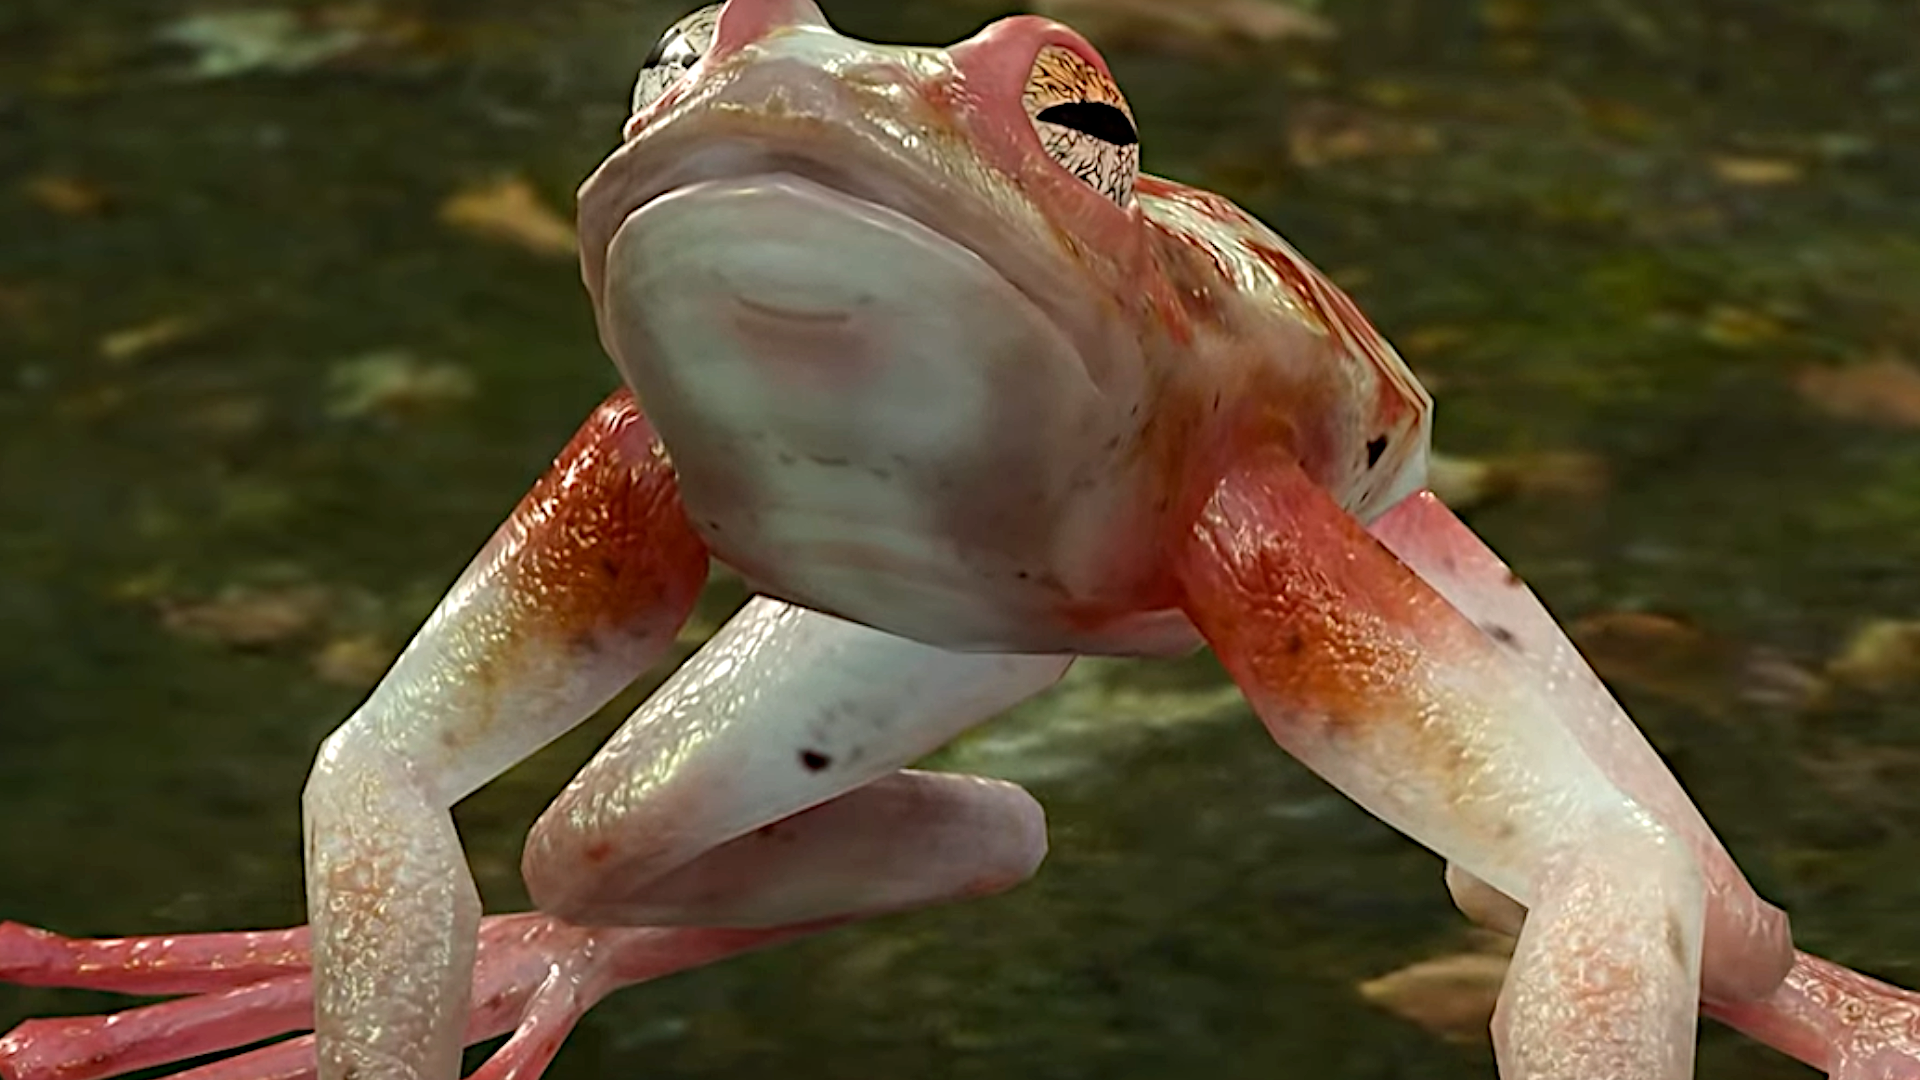 The Addled Frog from Baldur's Gate 3, a creature who can completely decimate your party if unprepared, despite just looking like a normal frog.